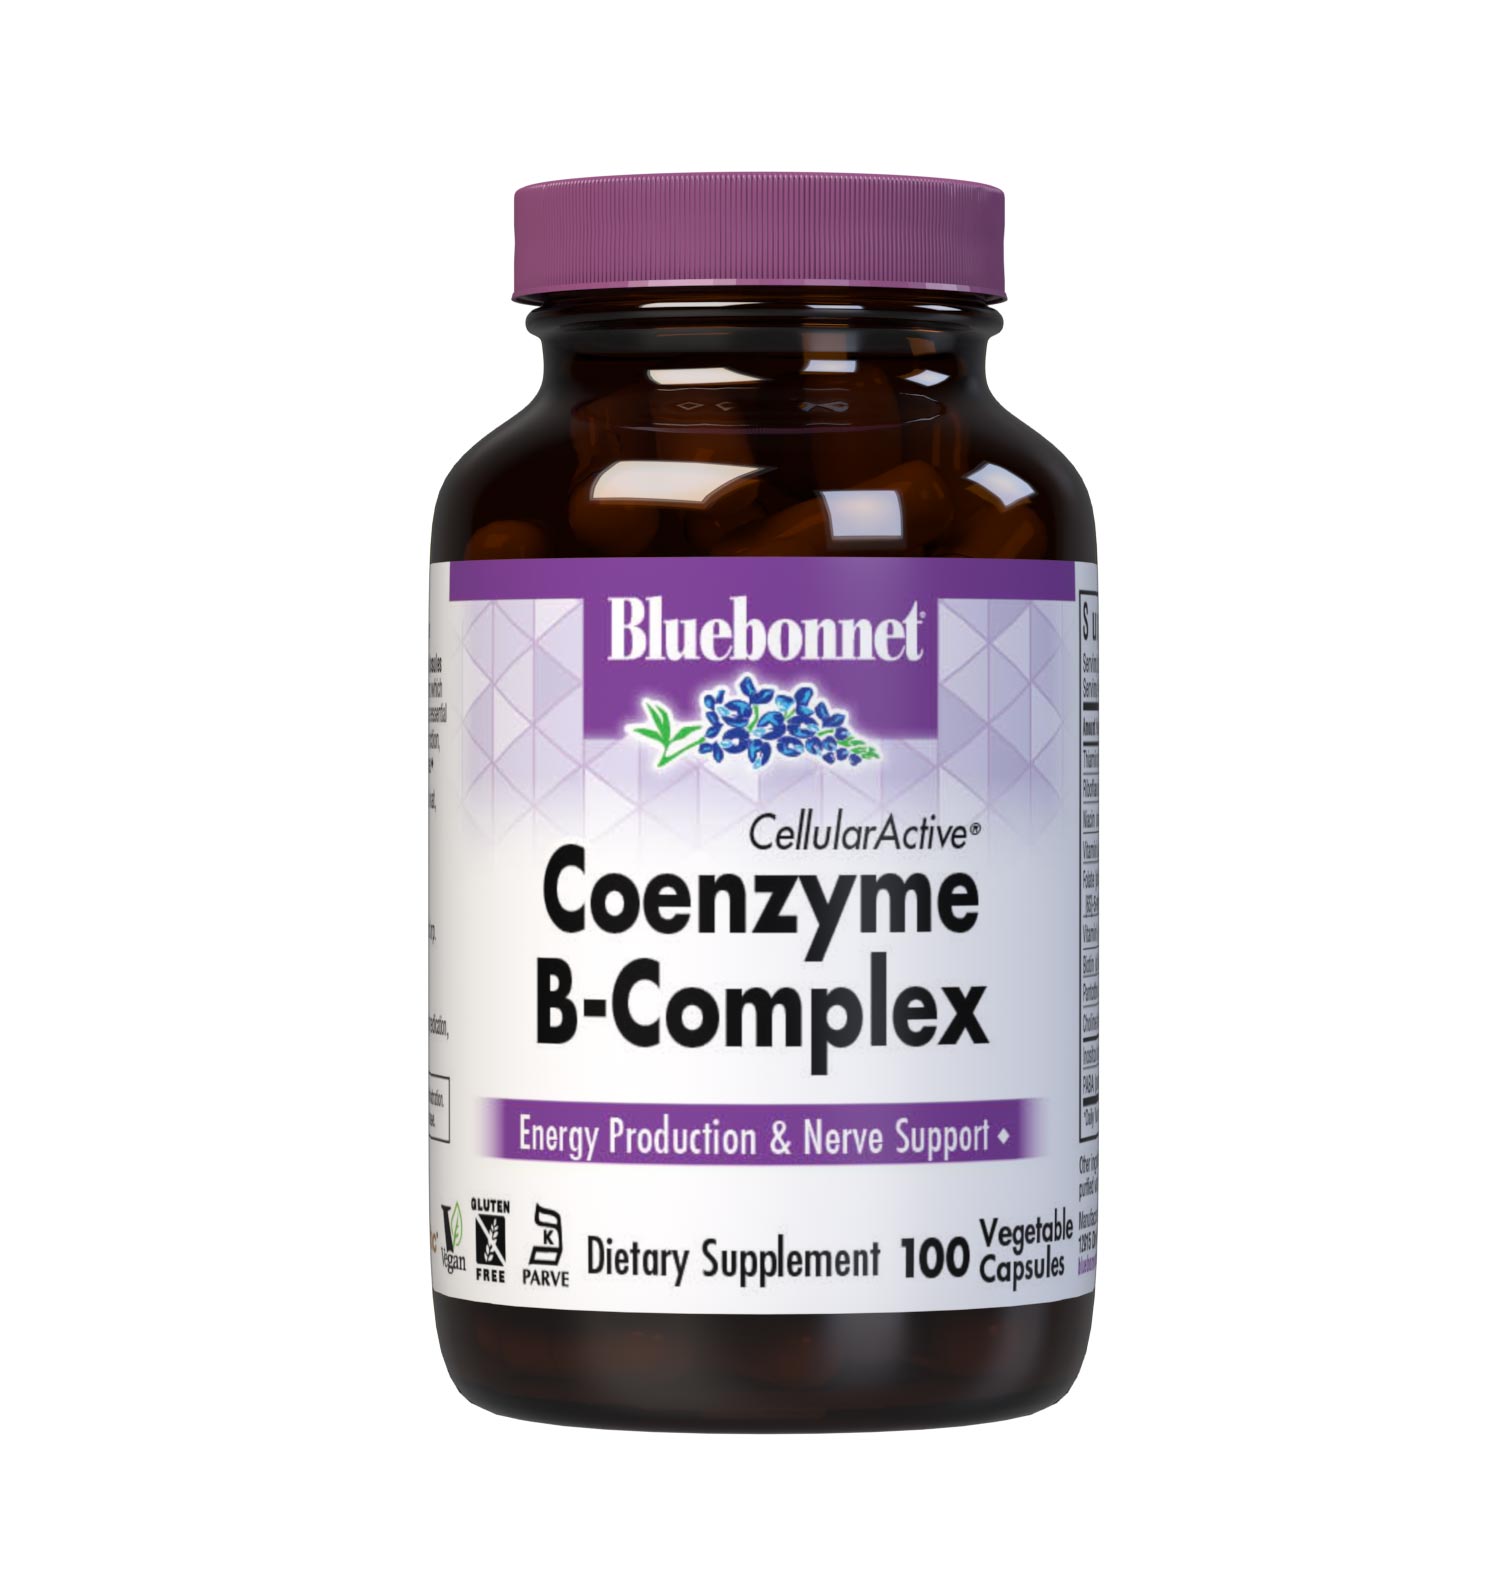 Bluebonnet’s CellularActive Coenzyme B-Complex Vegetable Capsules are formulated with B vitamins and their respective coenzyme forms, which are better absorbed, retained and utilized in the body. B vitamins are essential for energy and red blood cell production, proper nervous system function, healthy hair, skin and nails, and countless other metabolic processes. #size_100 count